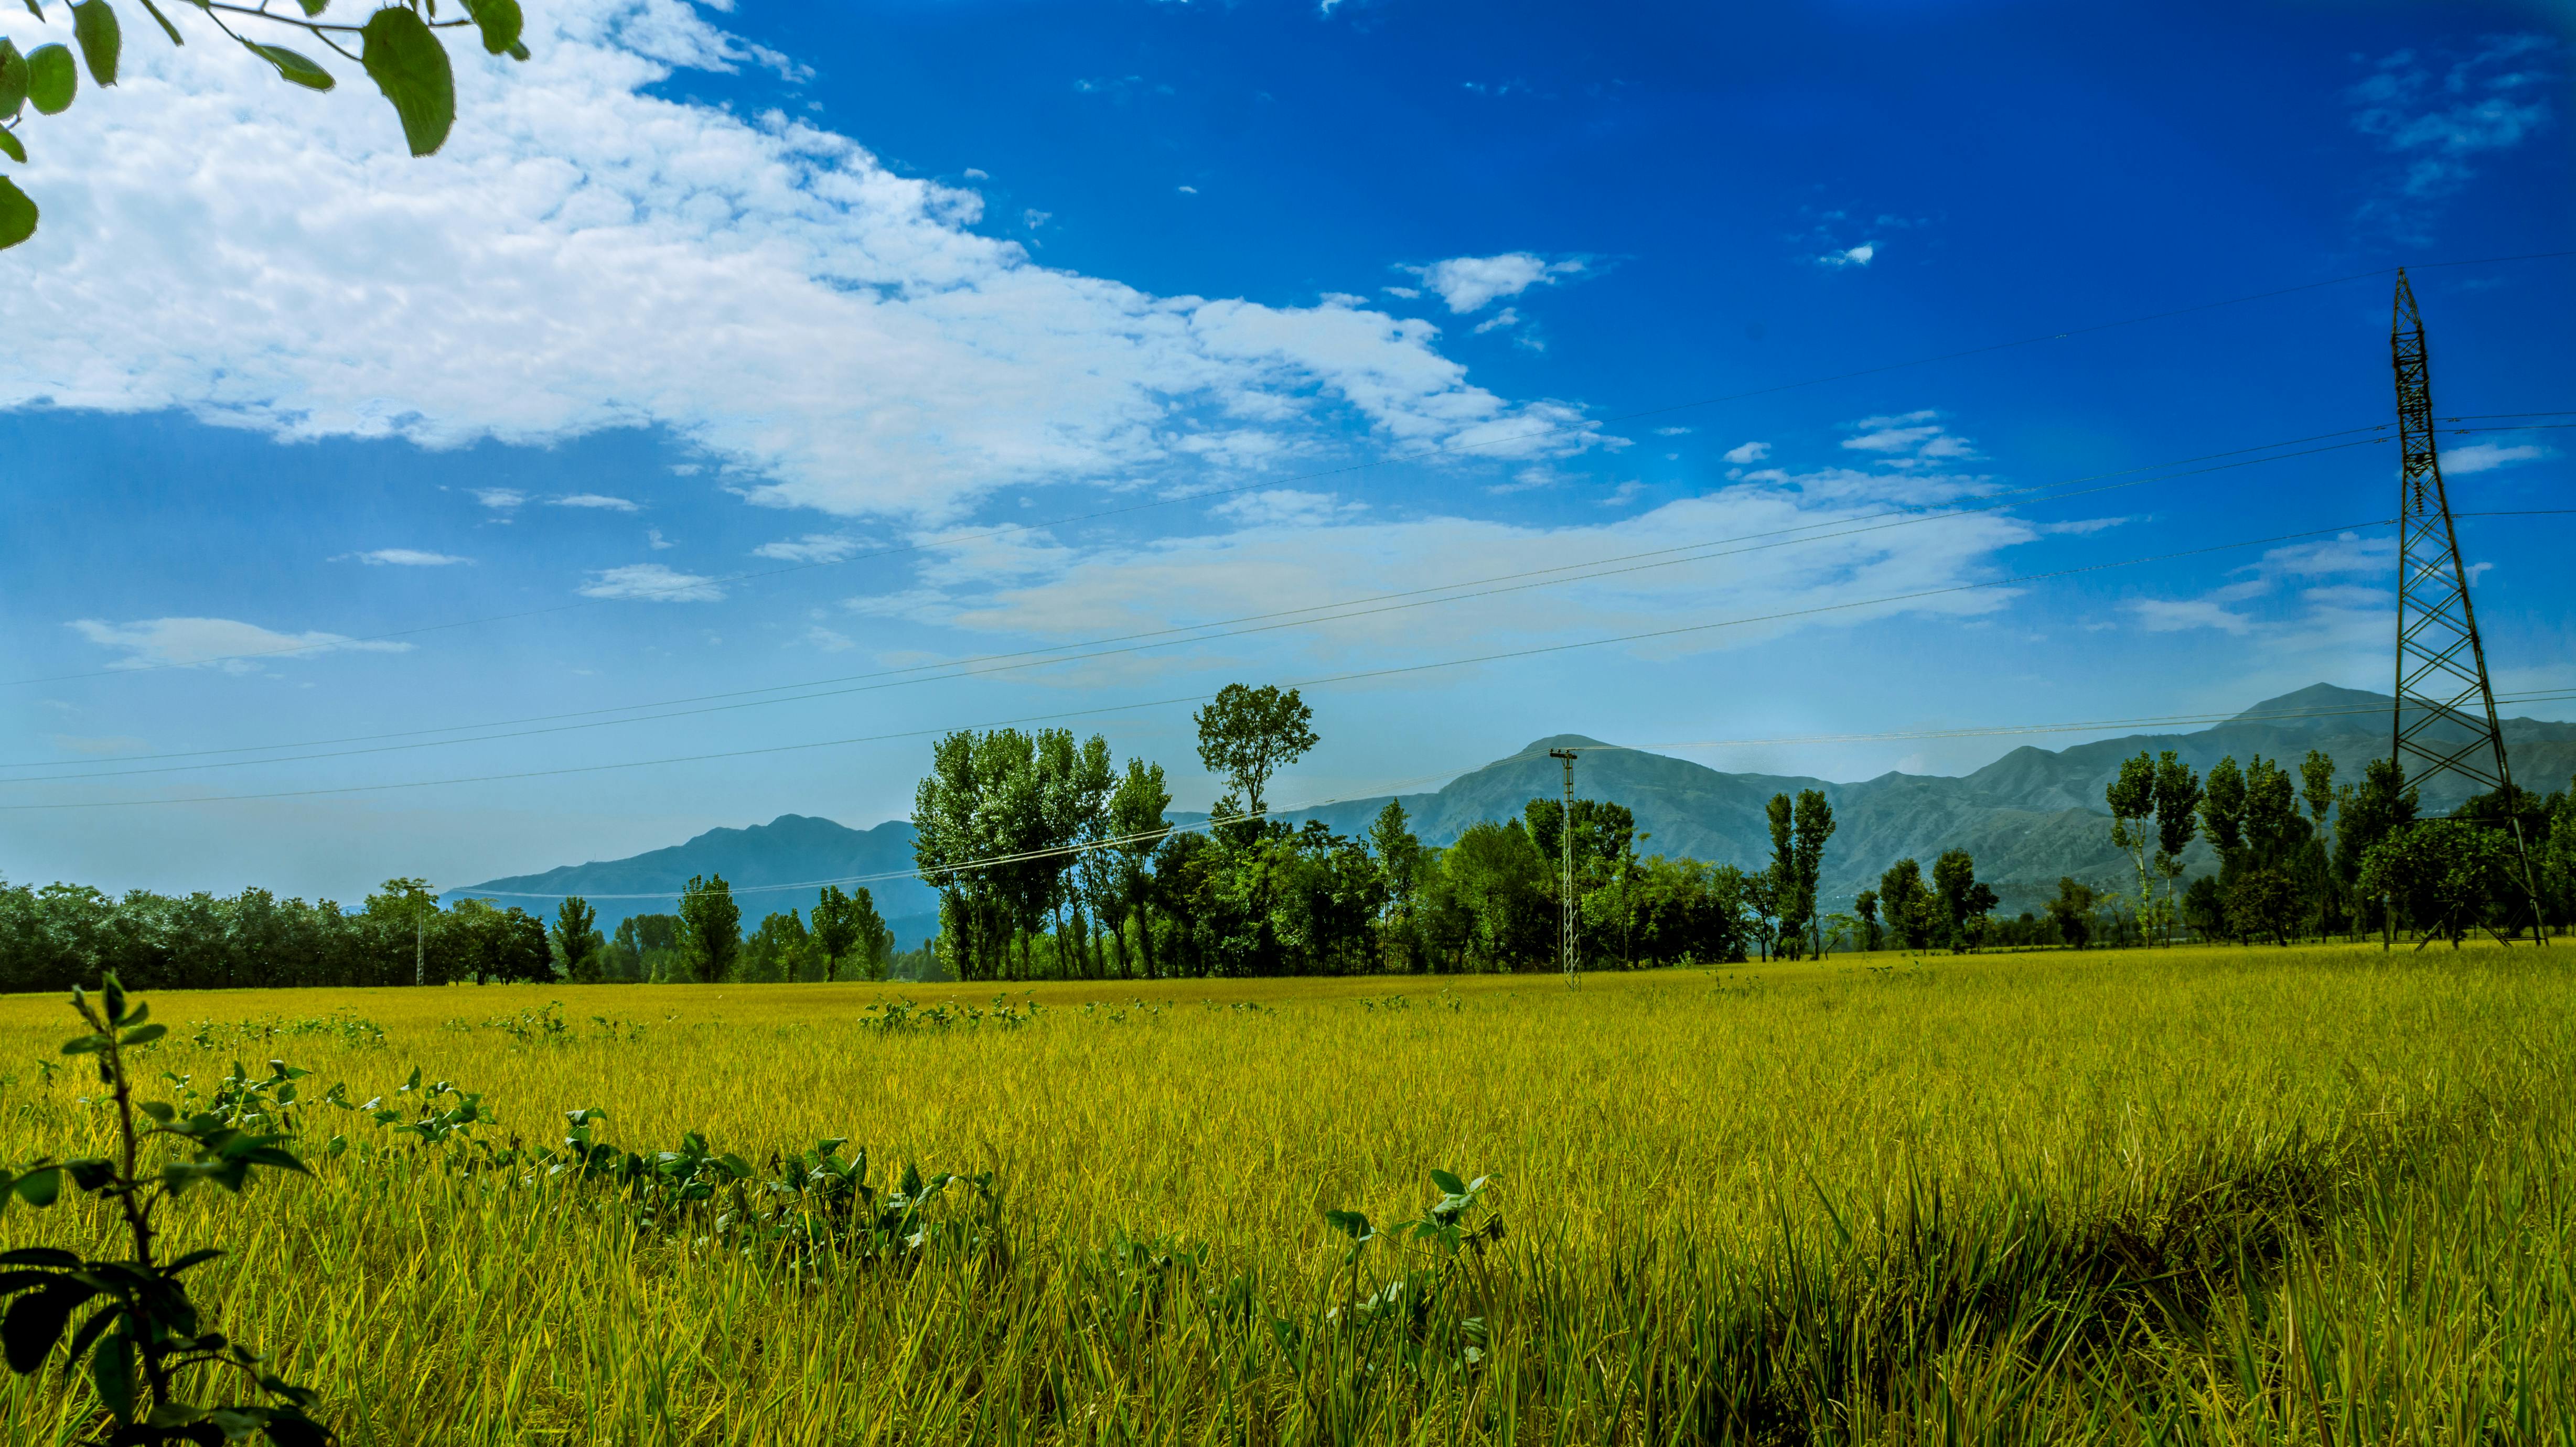 Green Rice Field Surrounded by Trees Under Clear Blue Sky · Free